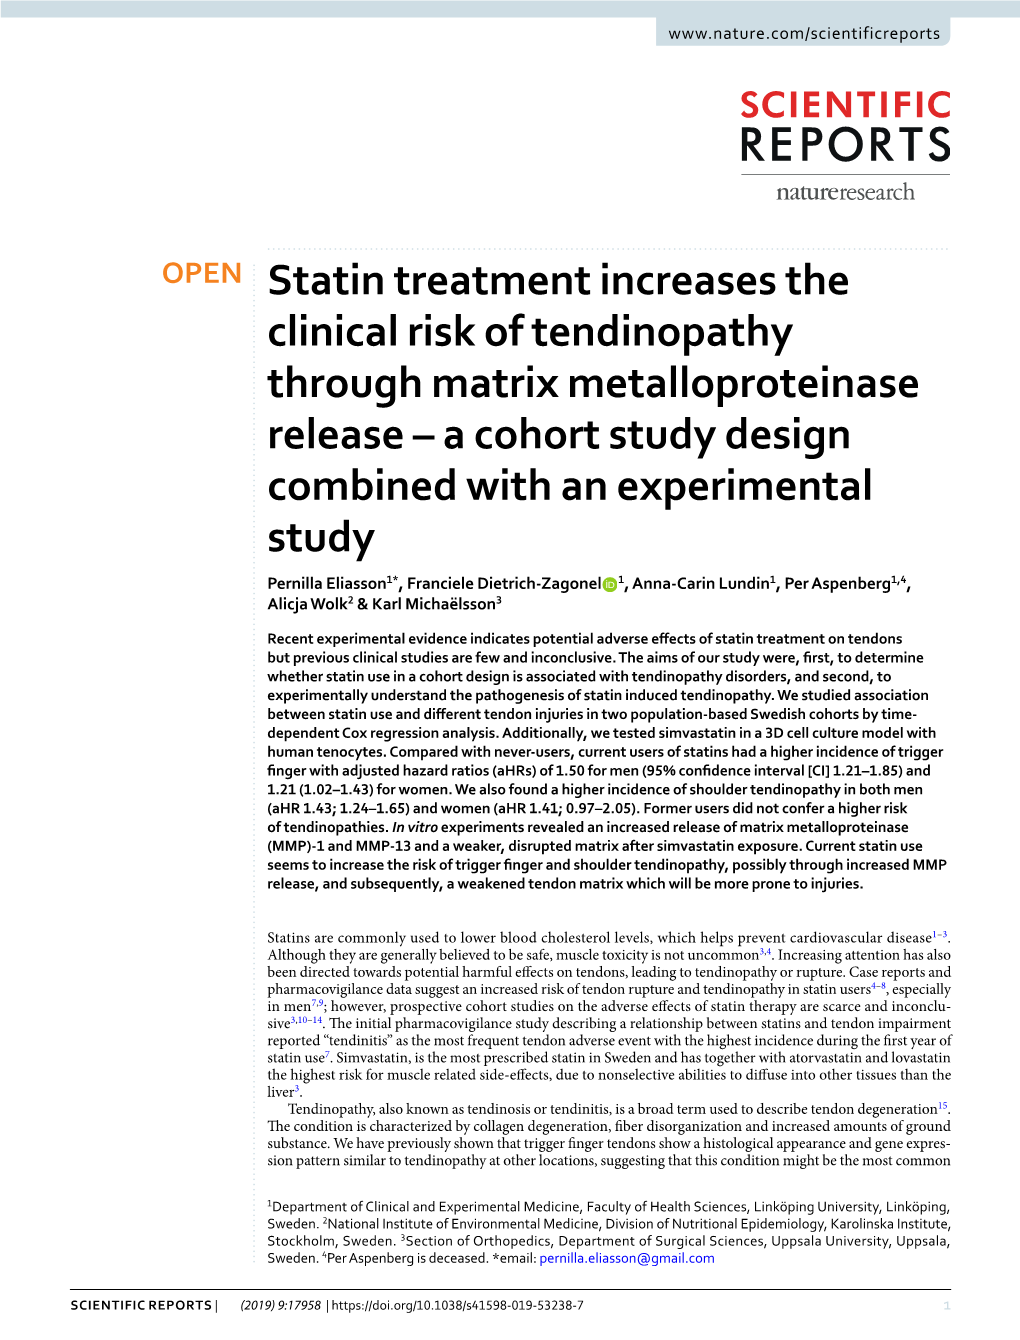 Statin Treatment Increases the Clinical Risk of Tendinopathy